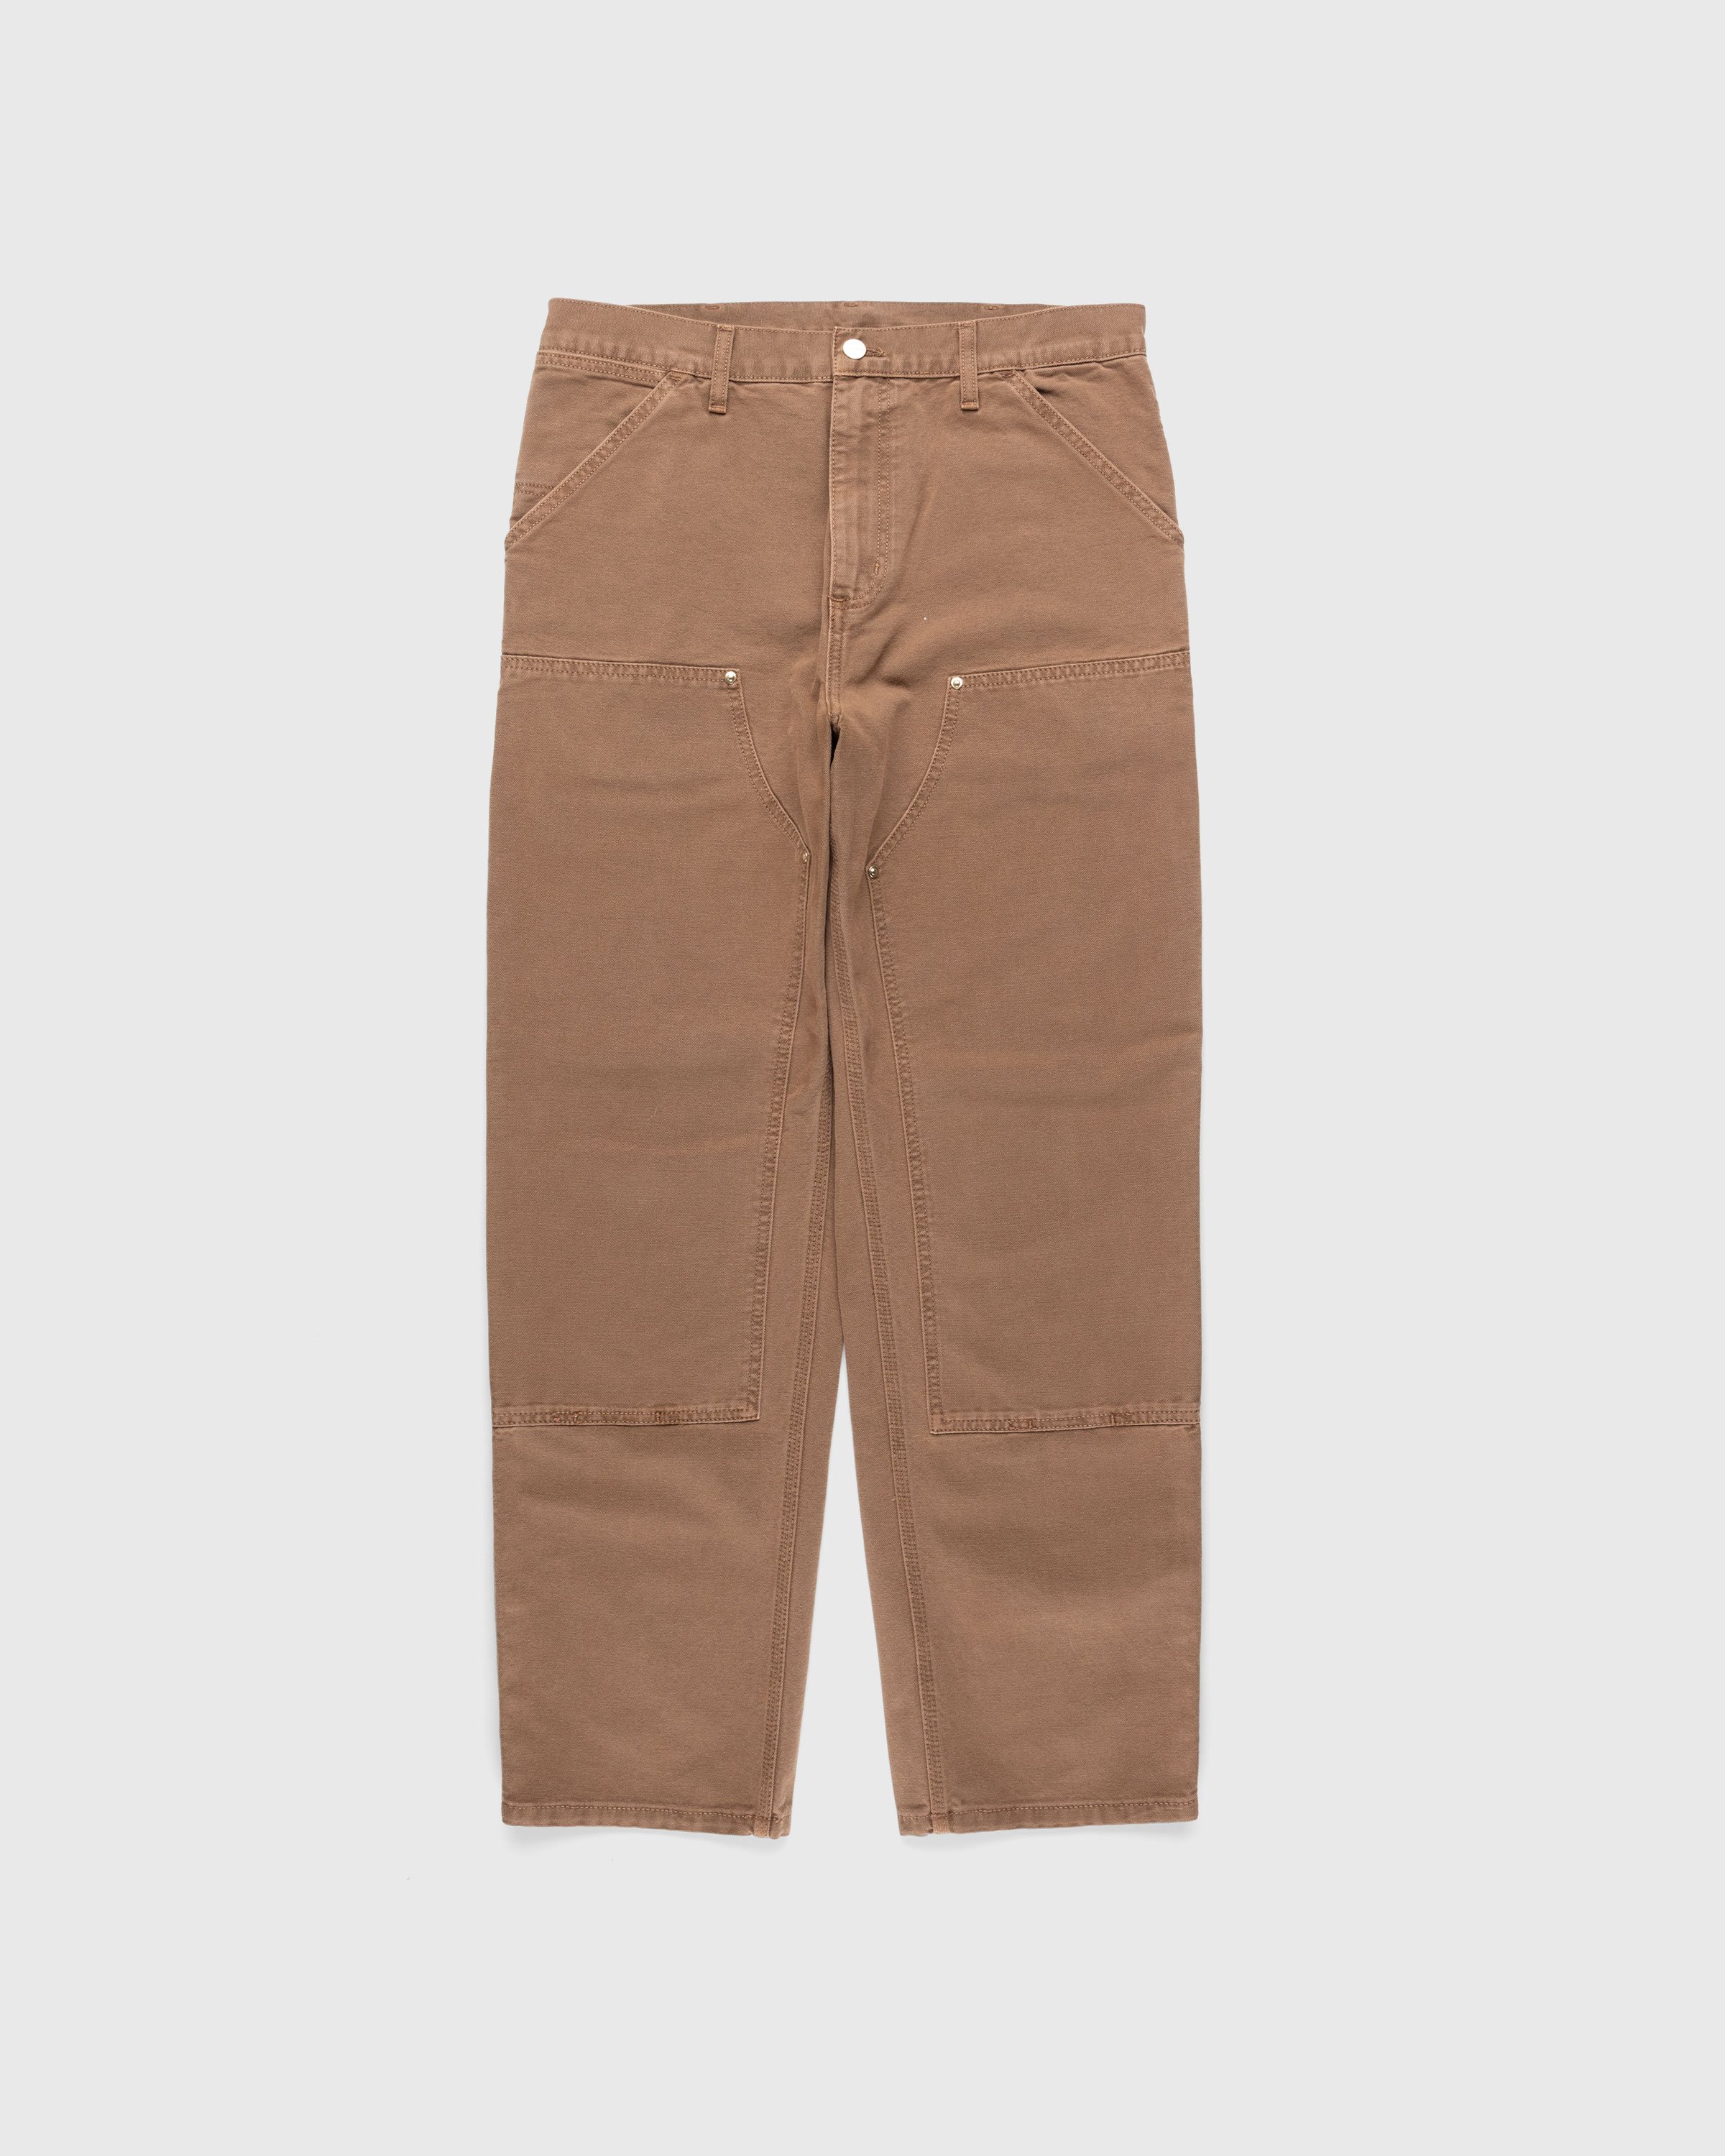 Carhartt WIP - Double Knee Pant Red - Clothing - Red - Image 1